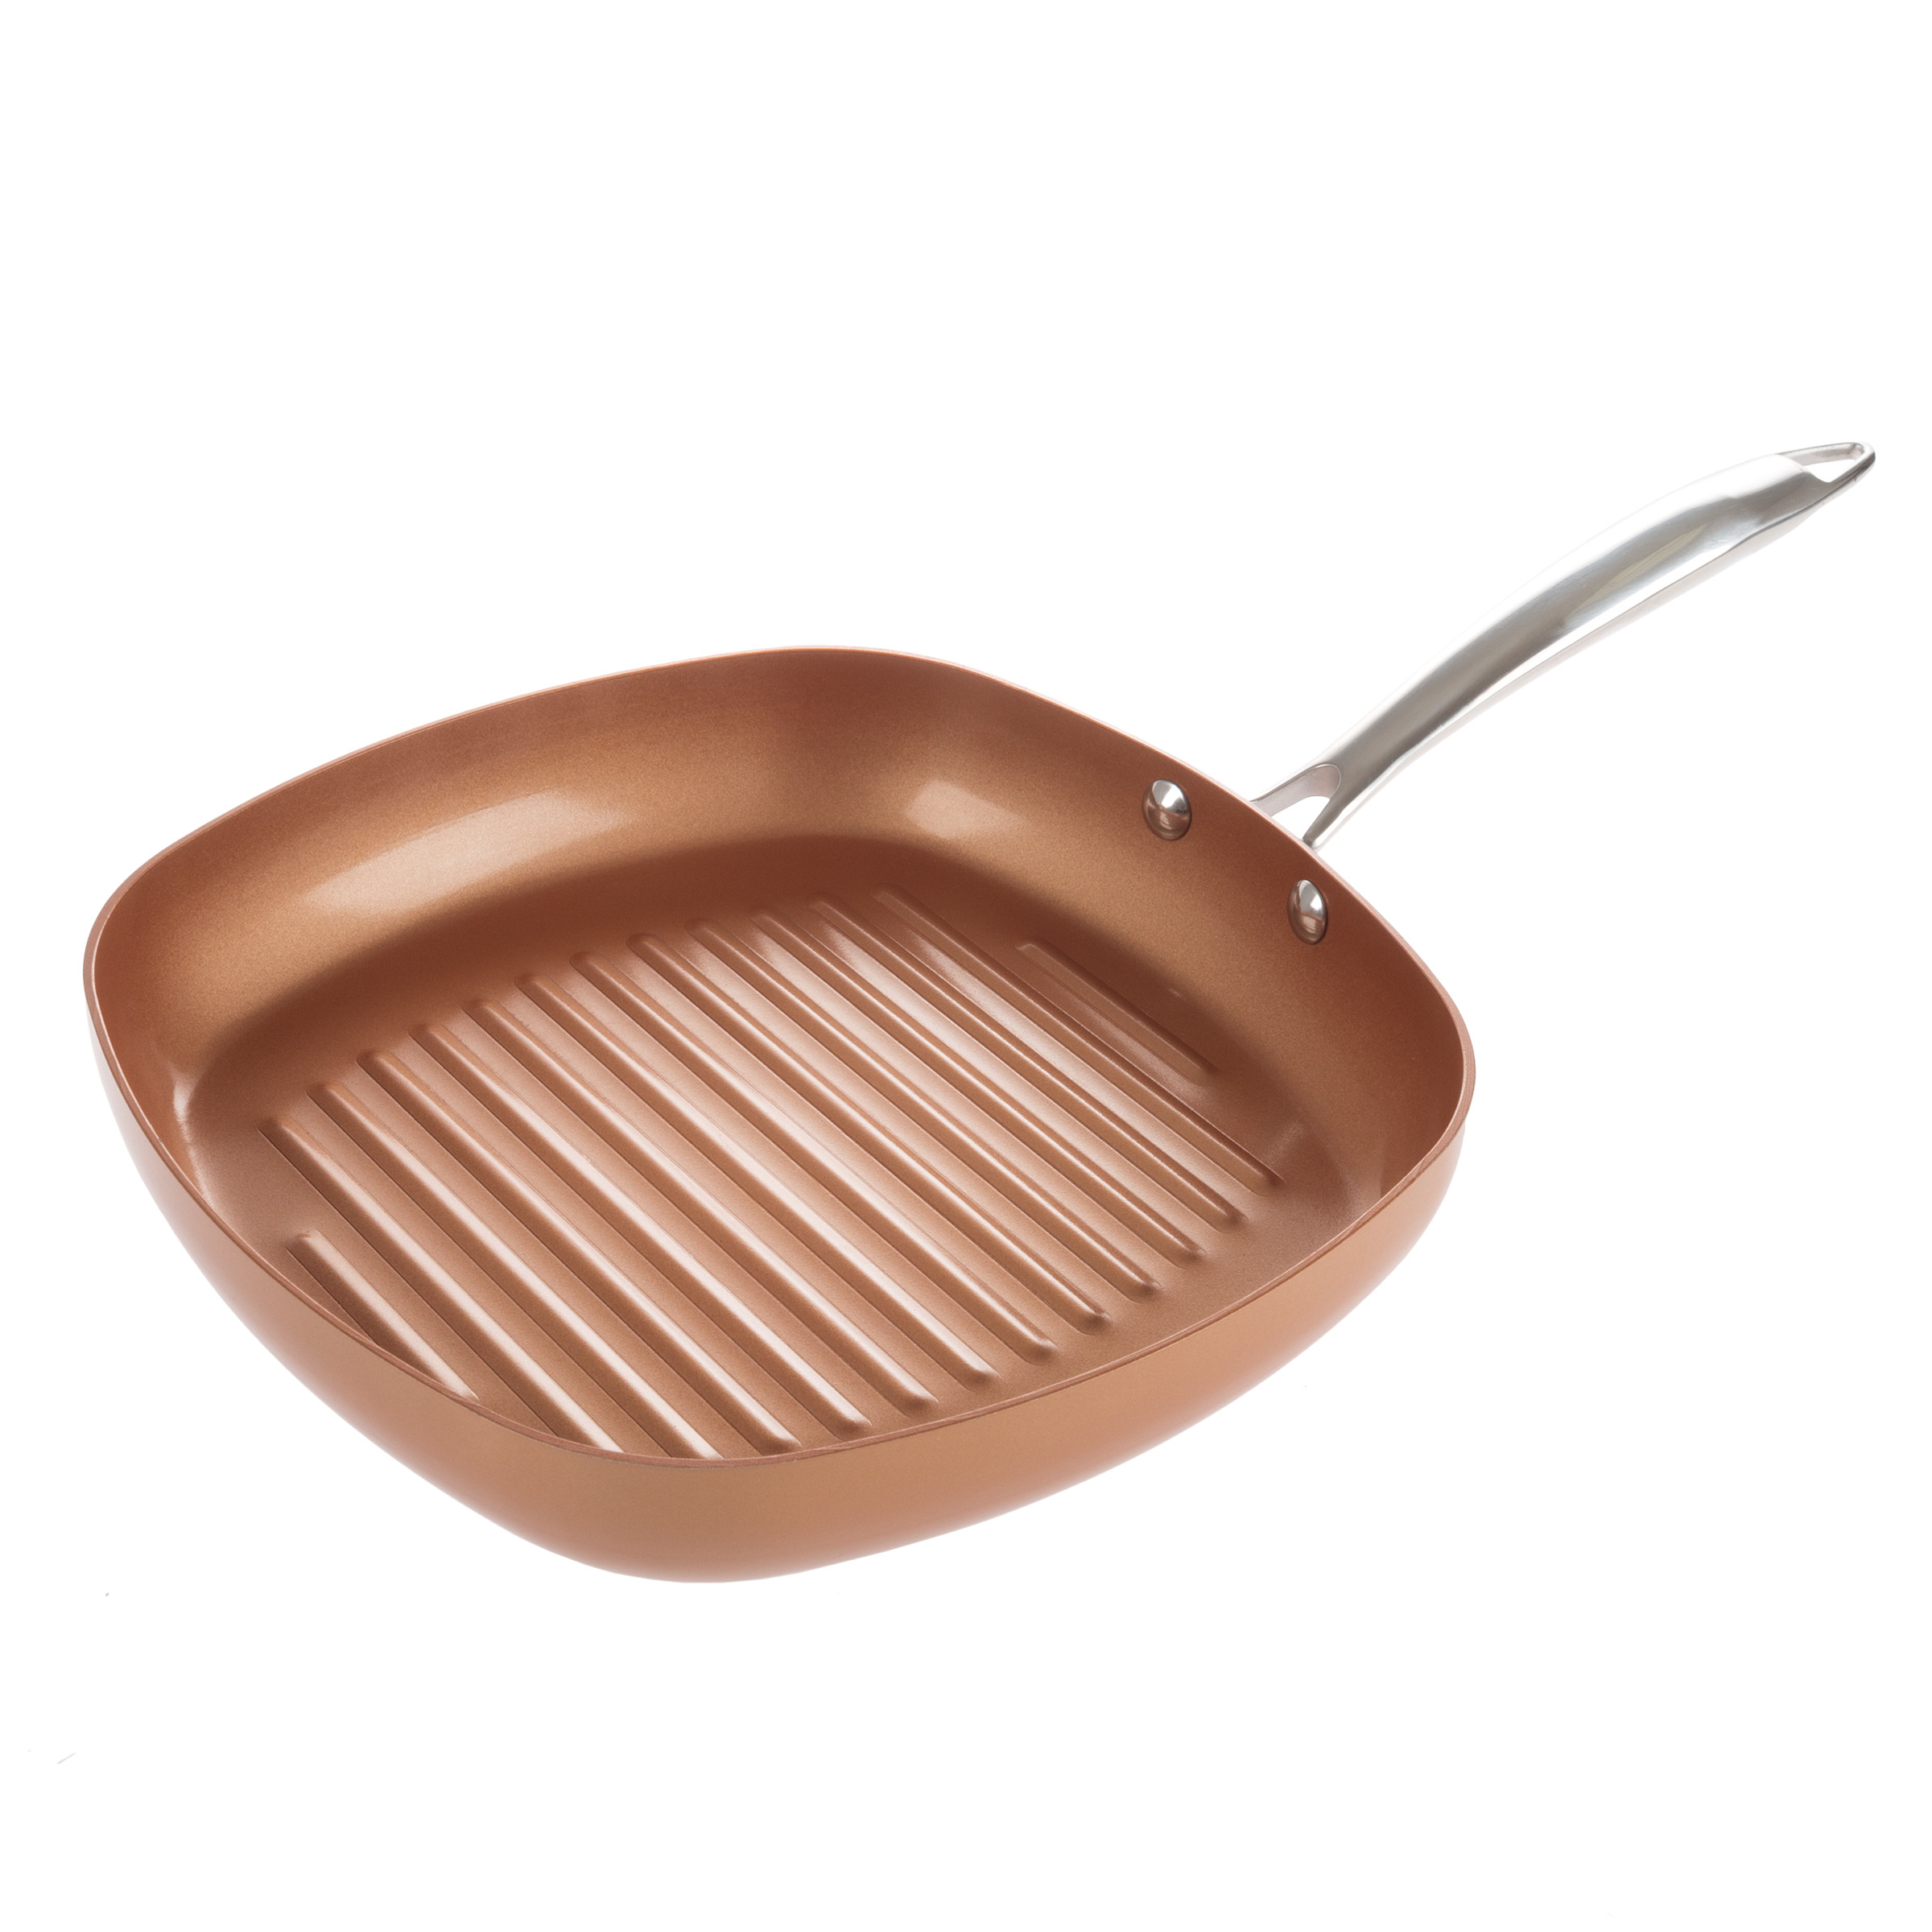 10 Inch Square Non Stick Skillet Grill Pan Copper Colored Dishwasher Oven Safe up to 500 Degrees